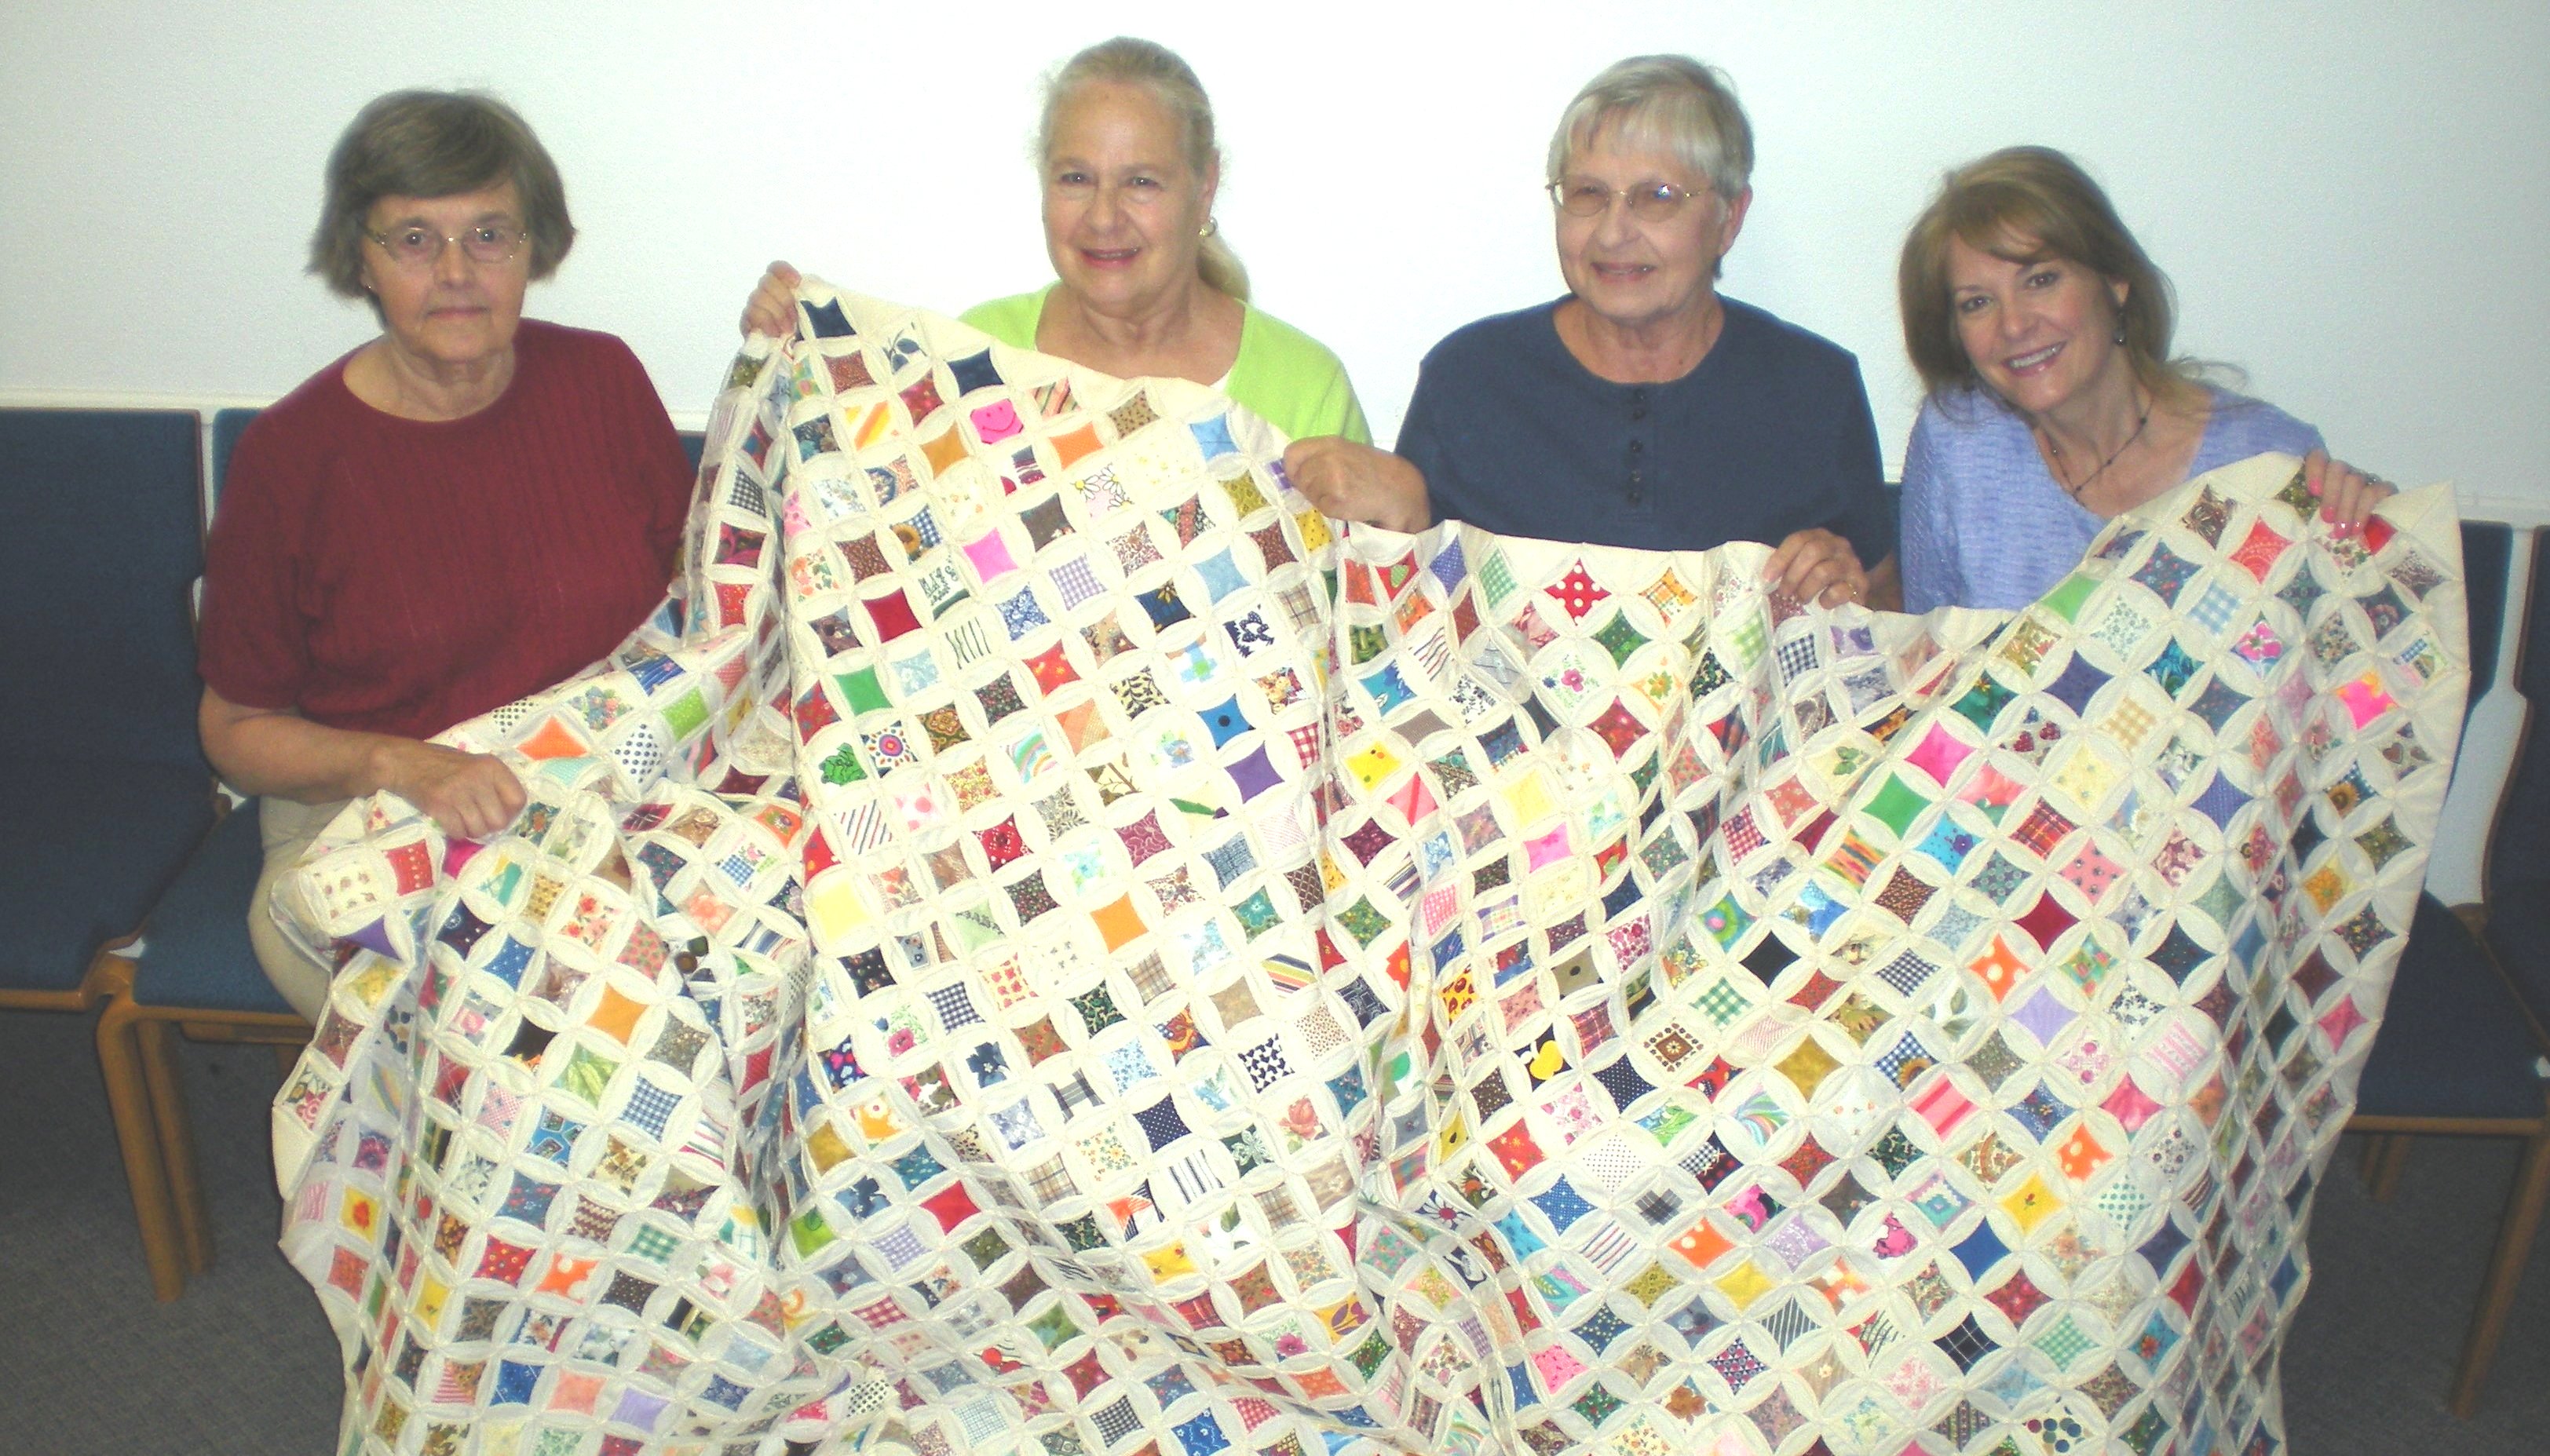 Piecing together memories: Completed quilt brings tears of joy to elderly woman